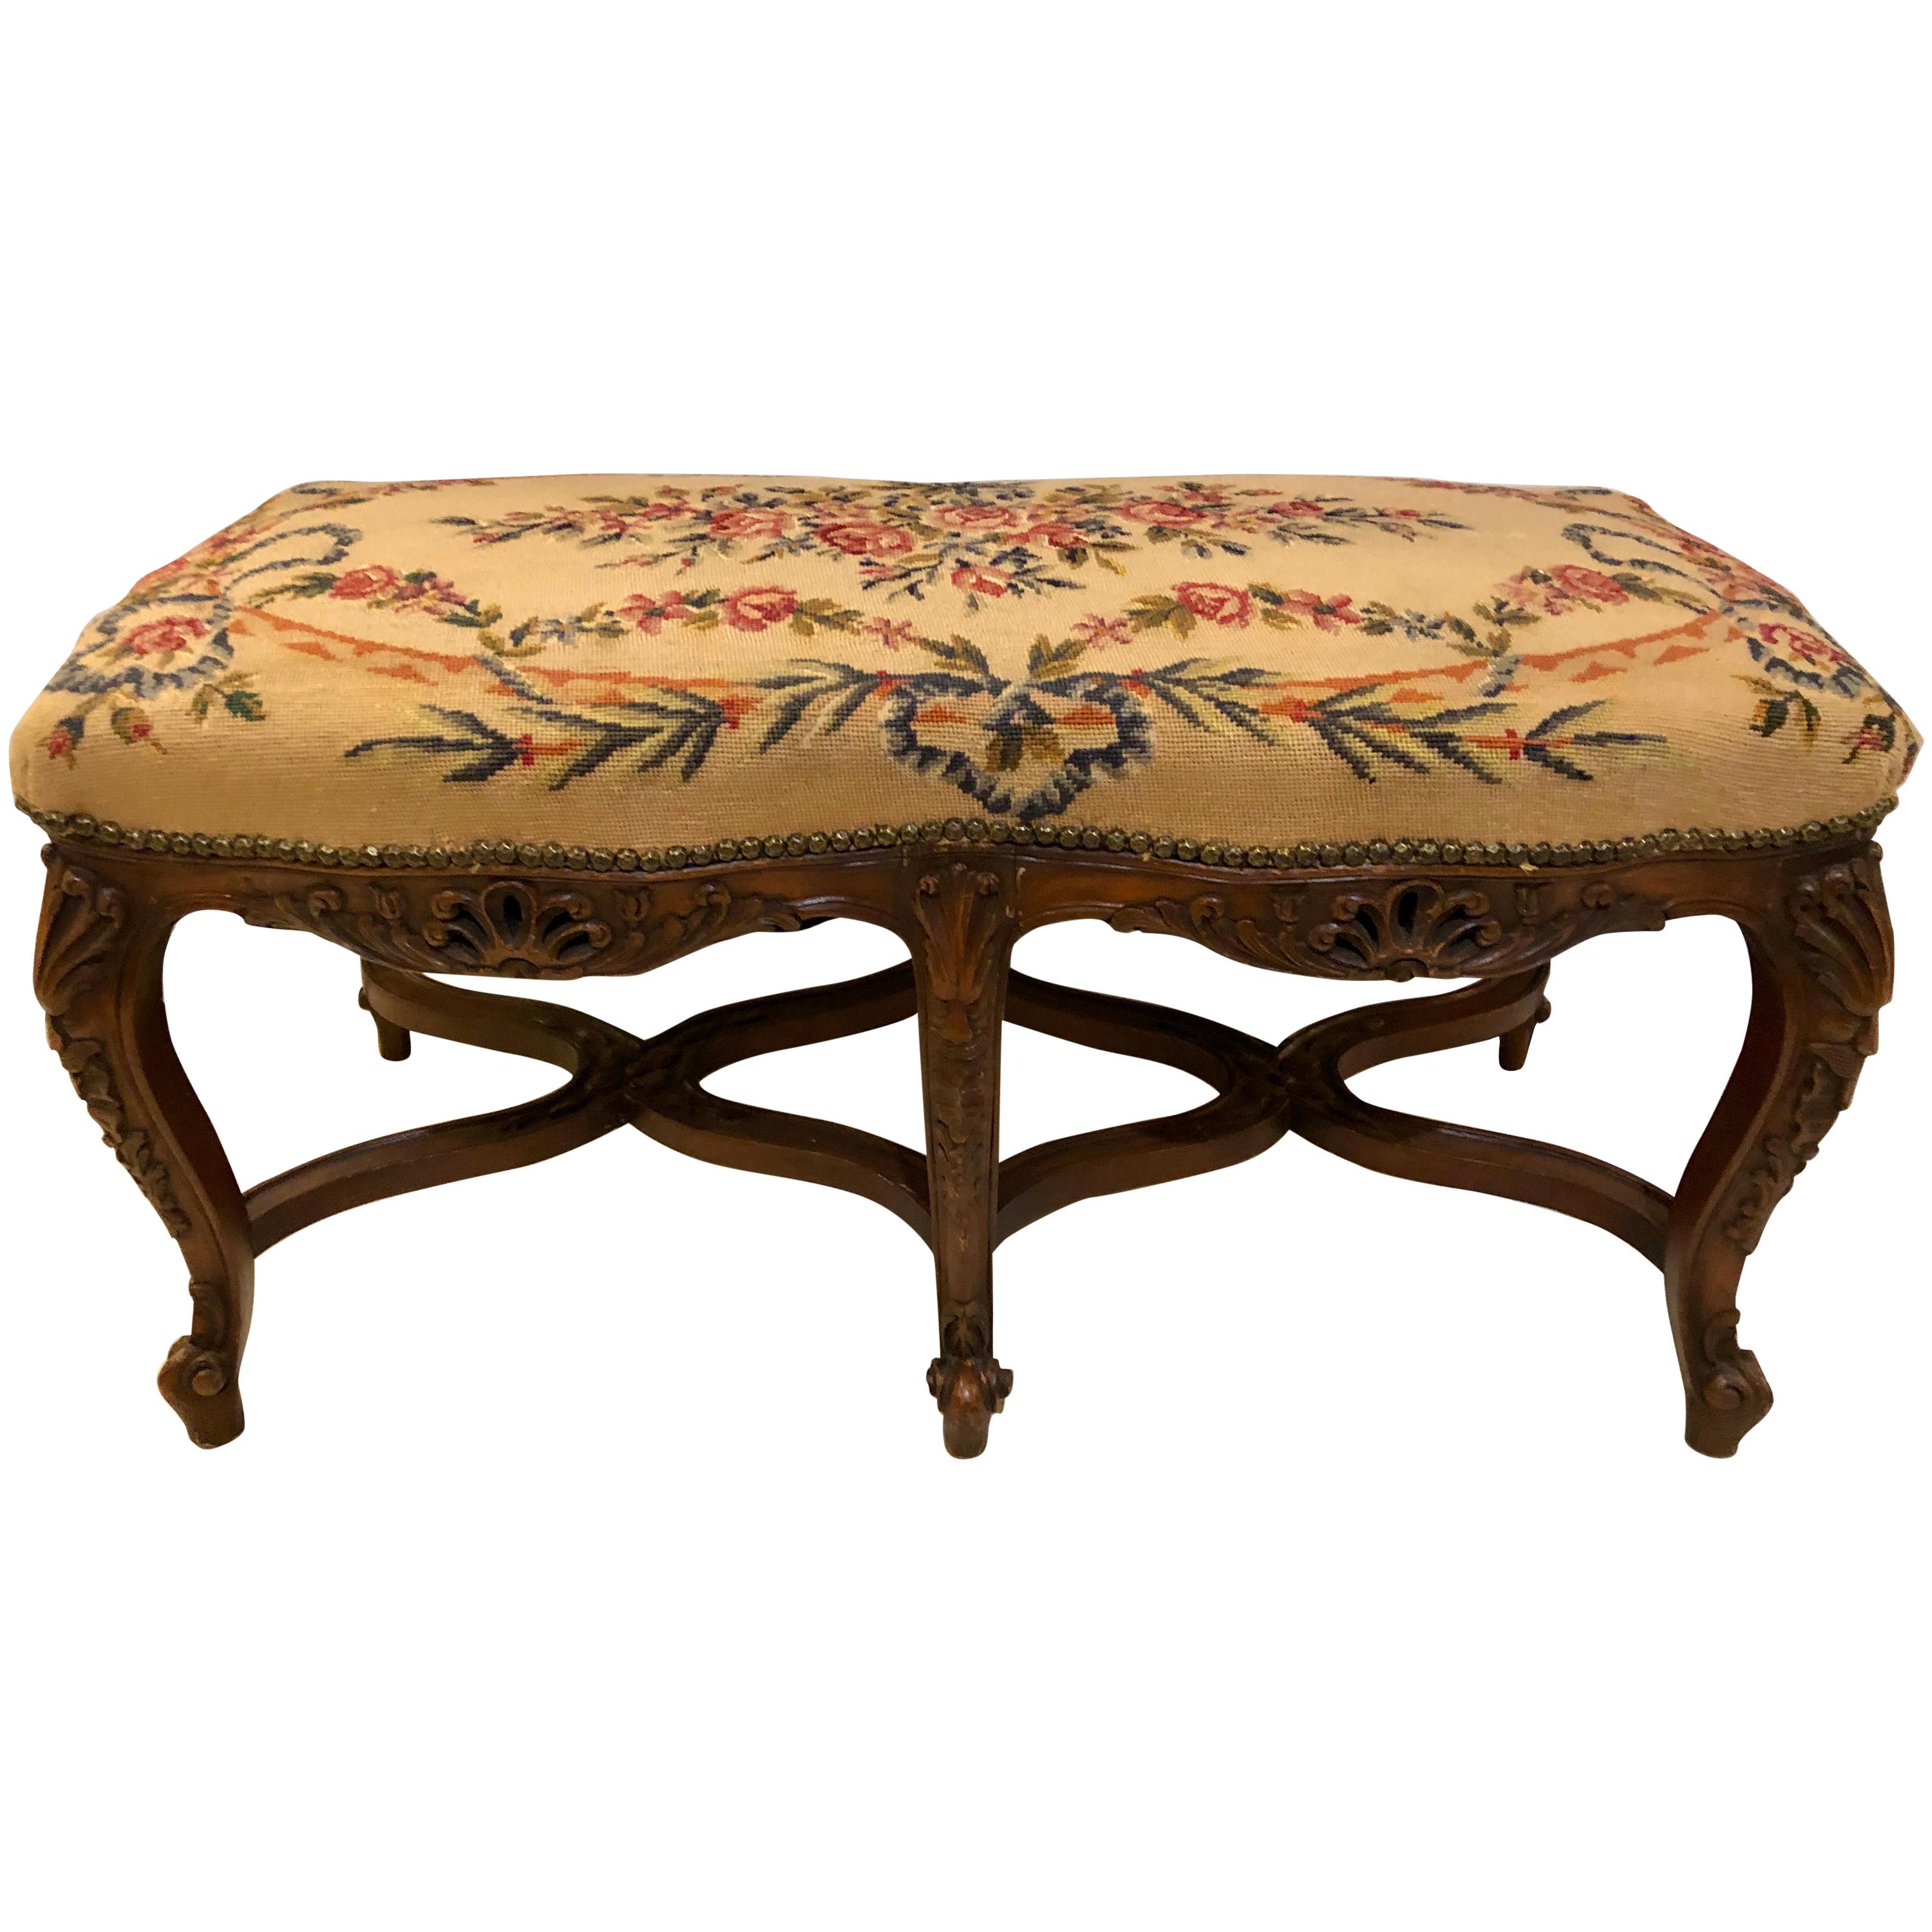 Needlepoint Louis XV Style Window Bench or Footstool